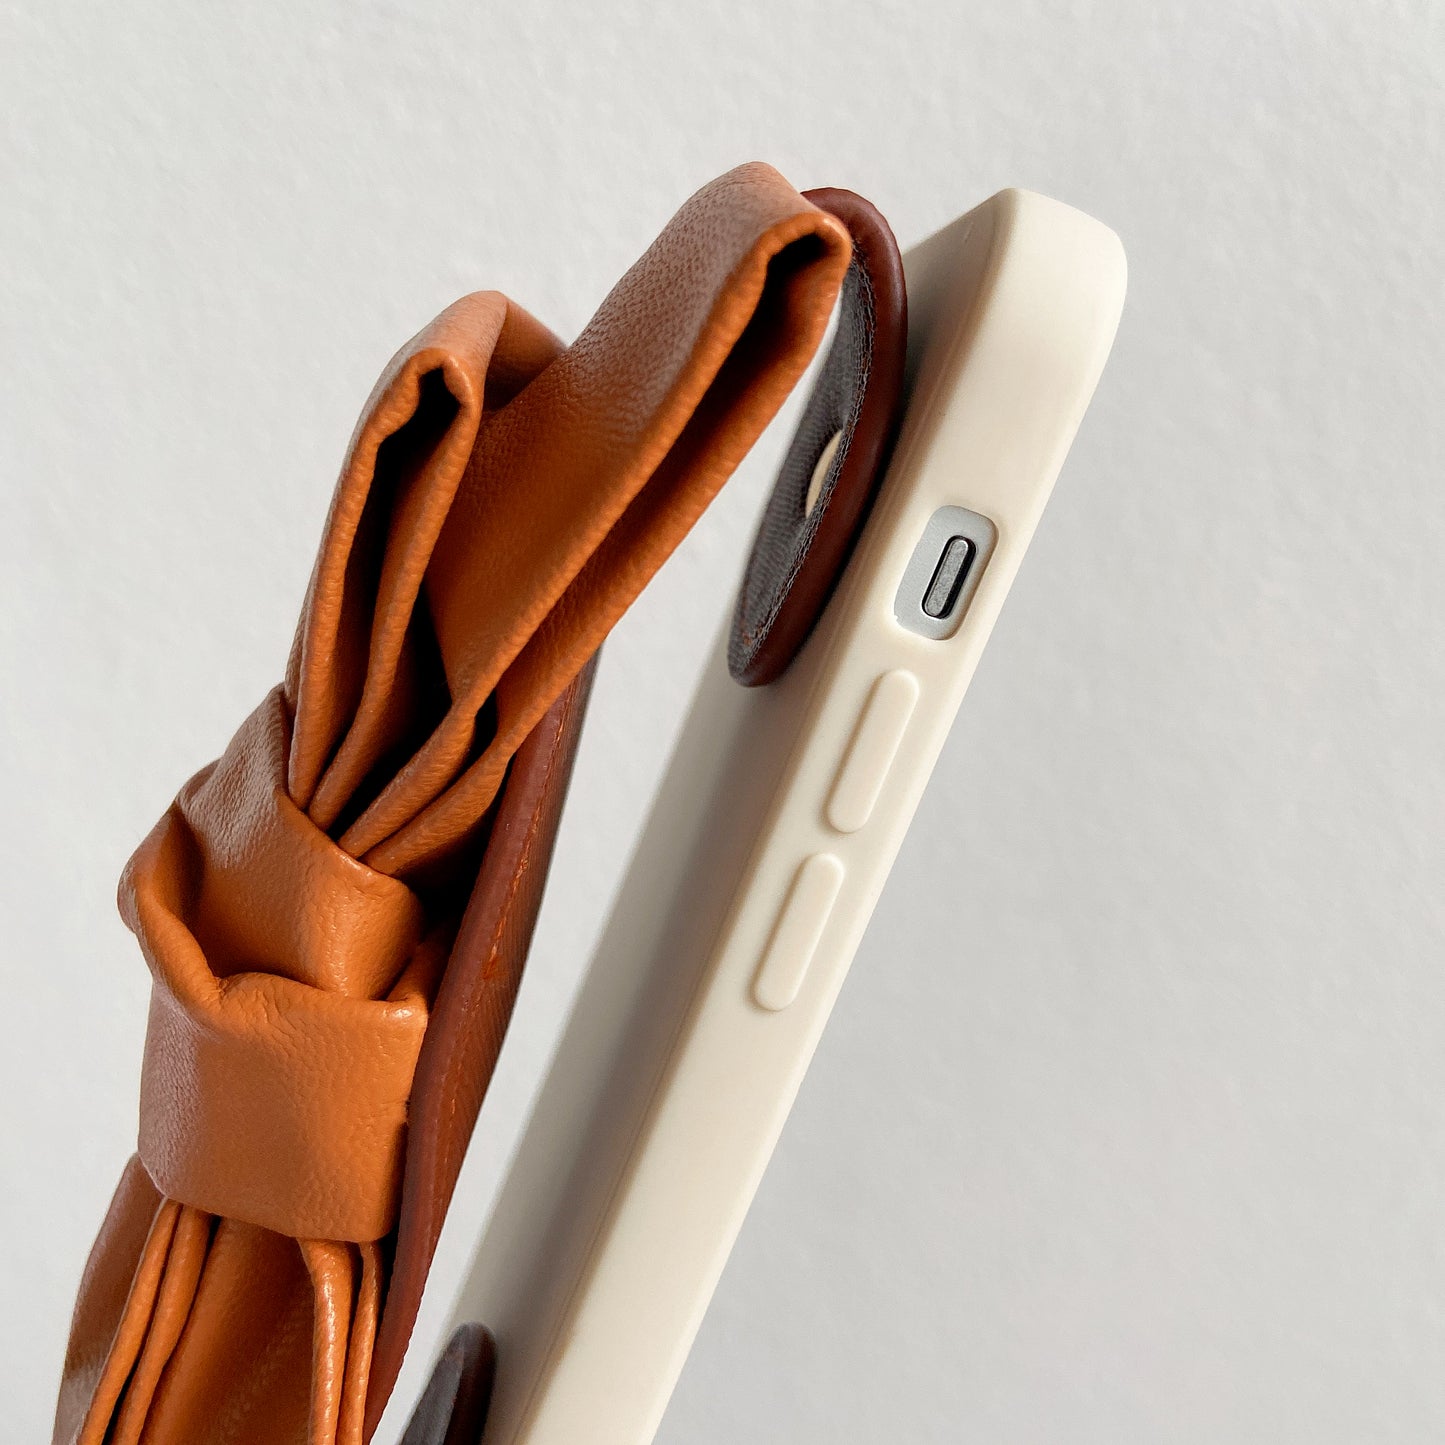 Bow wrist strap and back strap card case,iPhone case,iPhoneX-14Promax.